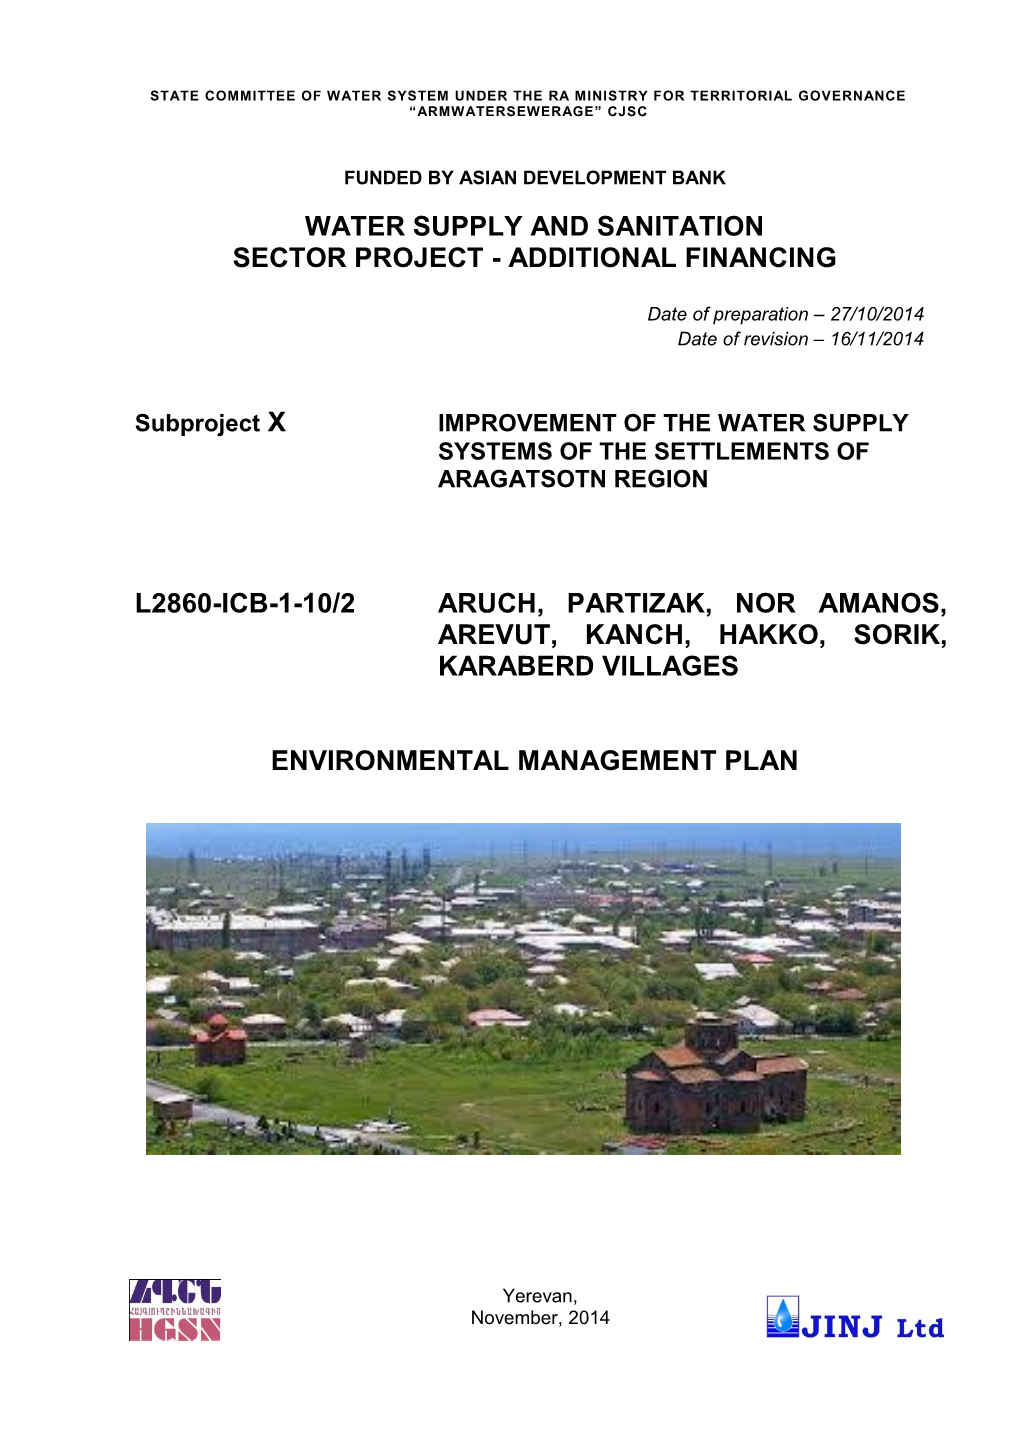 Water Supply and Sanitation Sector Project - Additional Financing